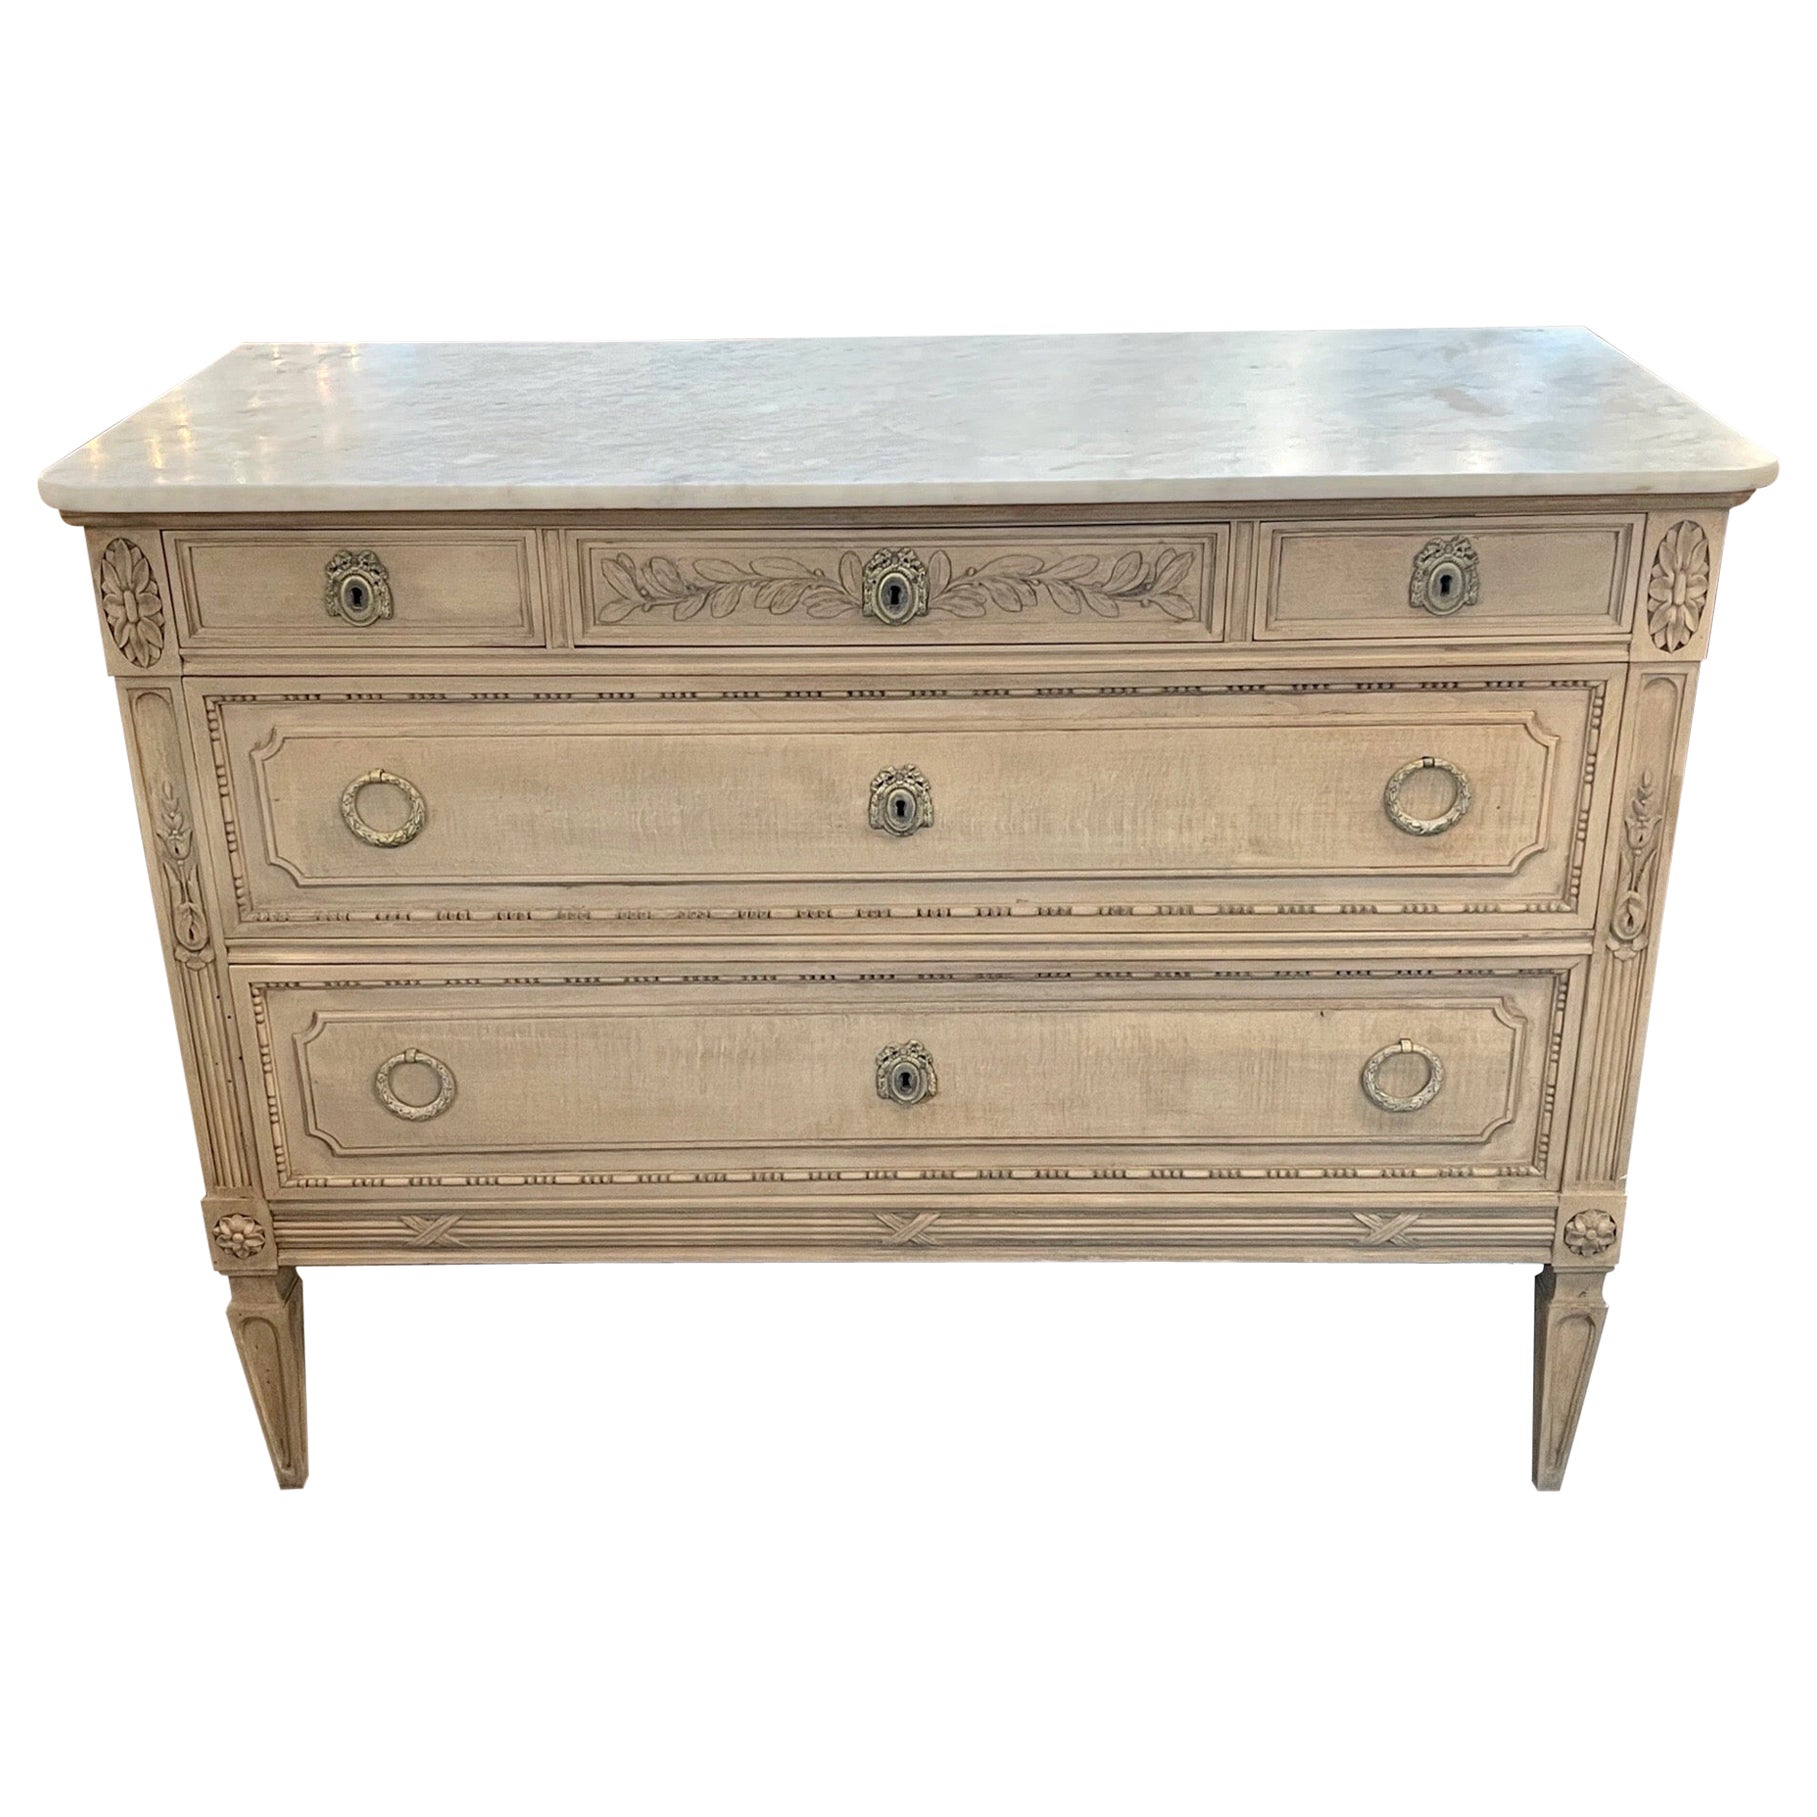 19th Century French Louis XVI Style Bleached Commode with Carrara Marble Top